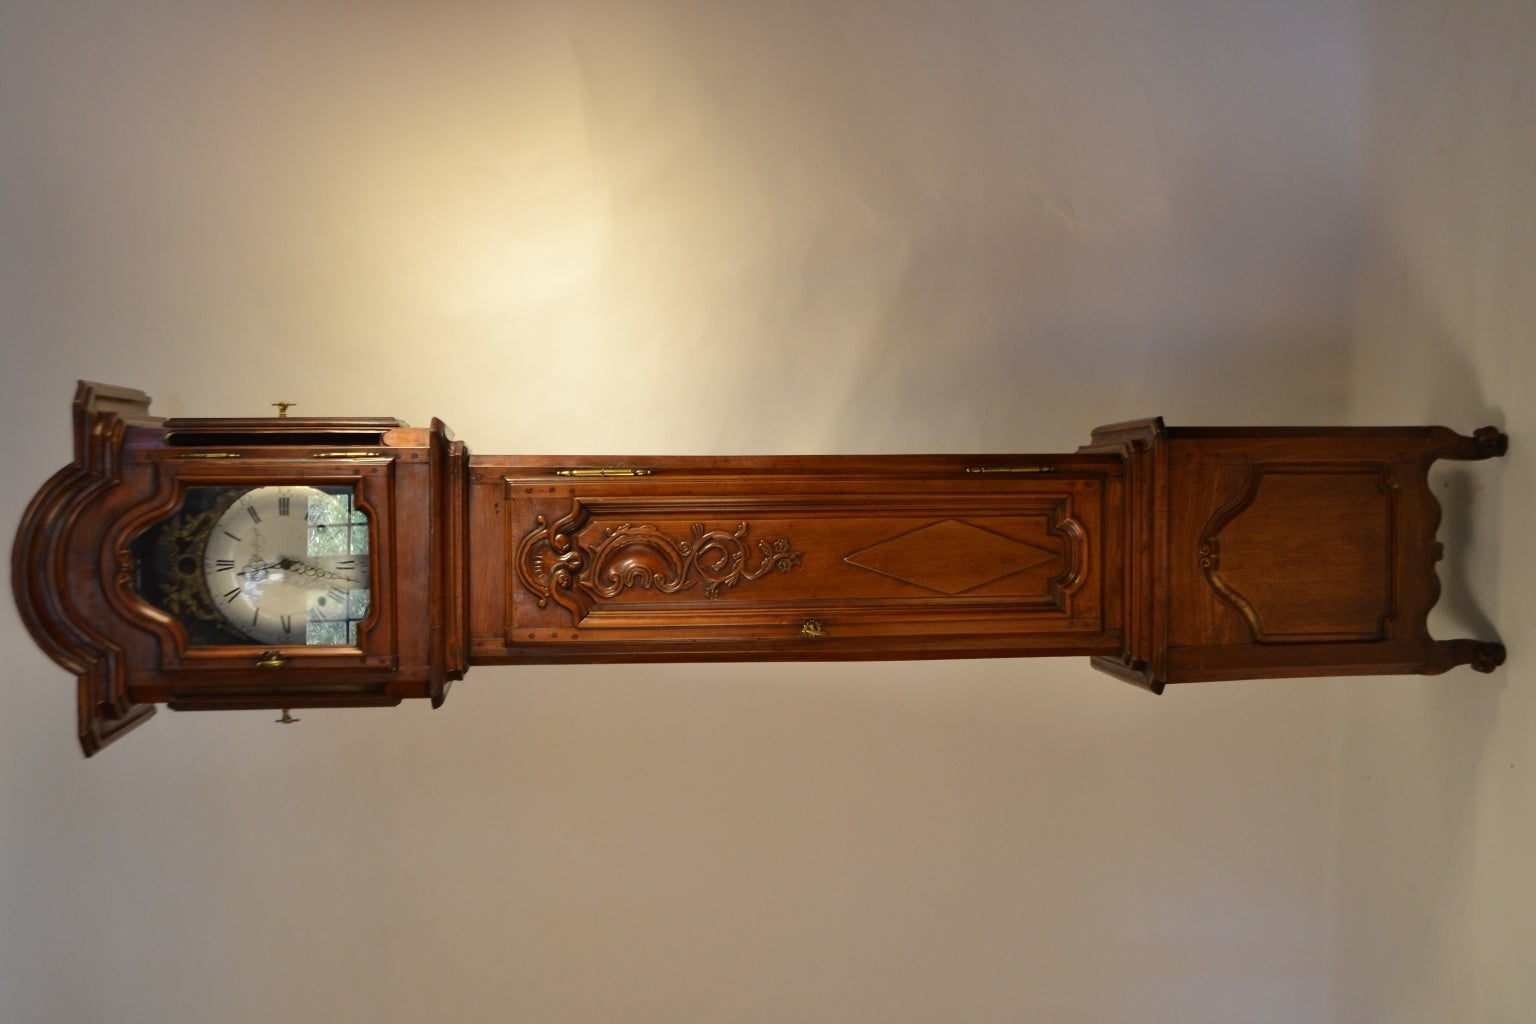 Cherry floor clock from Brittany (Rennes). The bonnet or pediment of the clock as well as the base features carved scroll work which frames the glass and base. There are two easy side access panels with glass at the top. The body of the clock